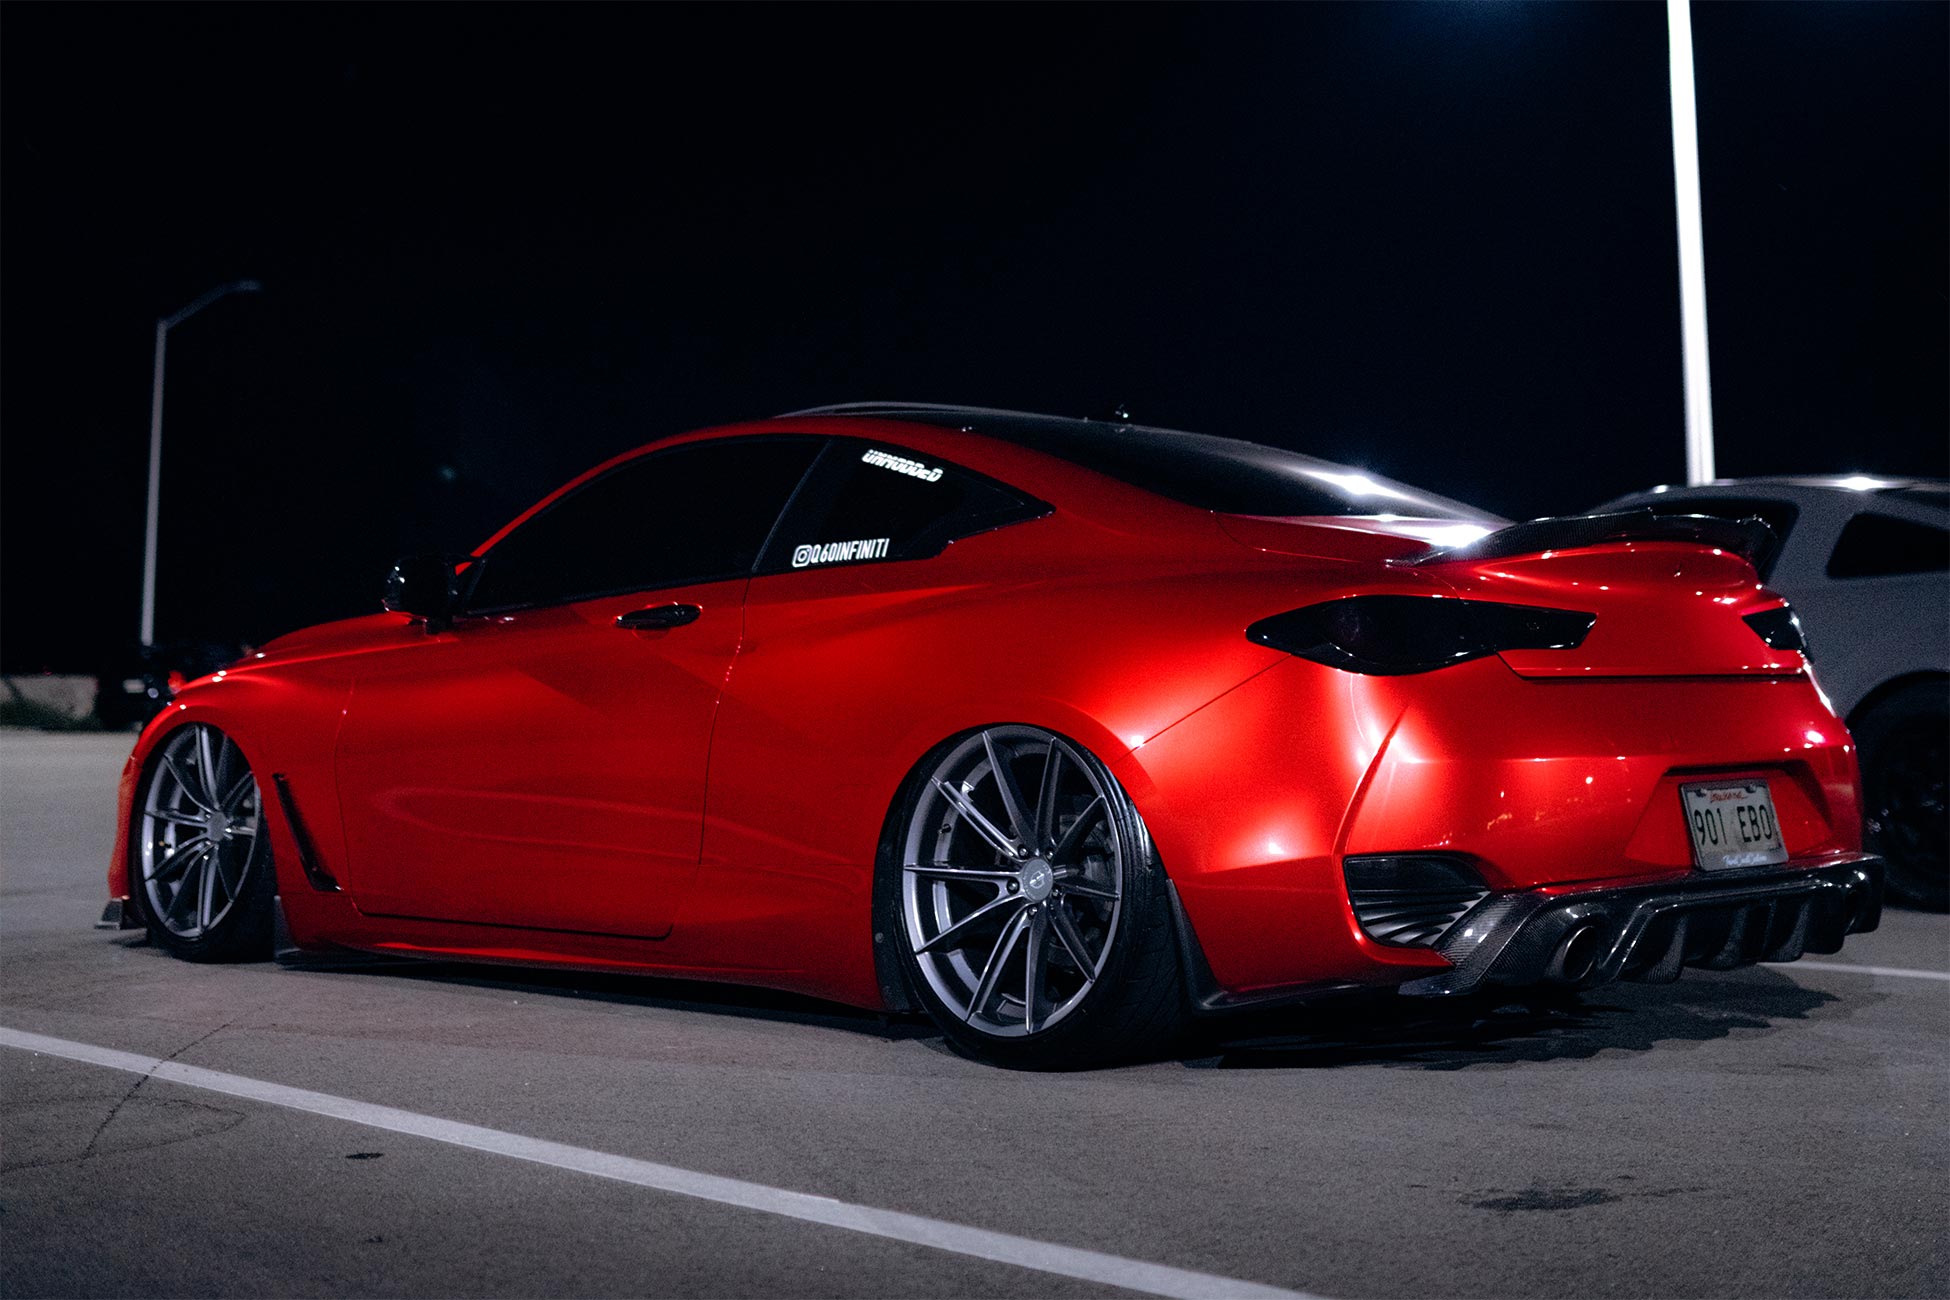 Bagged Q60 on staggered 20" C46's